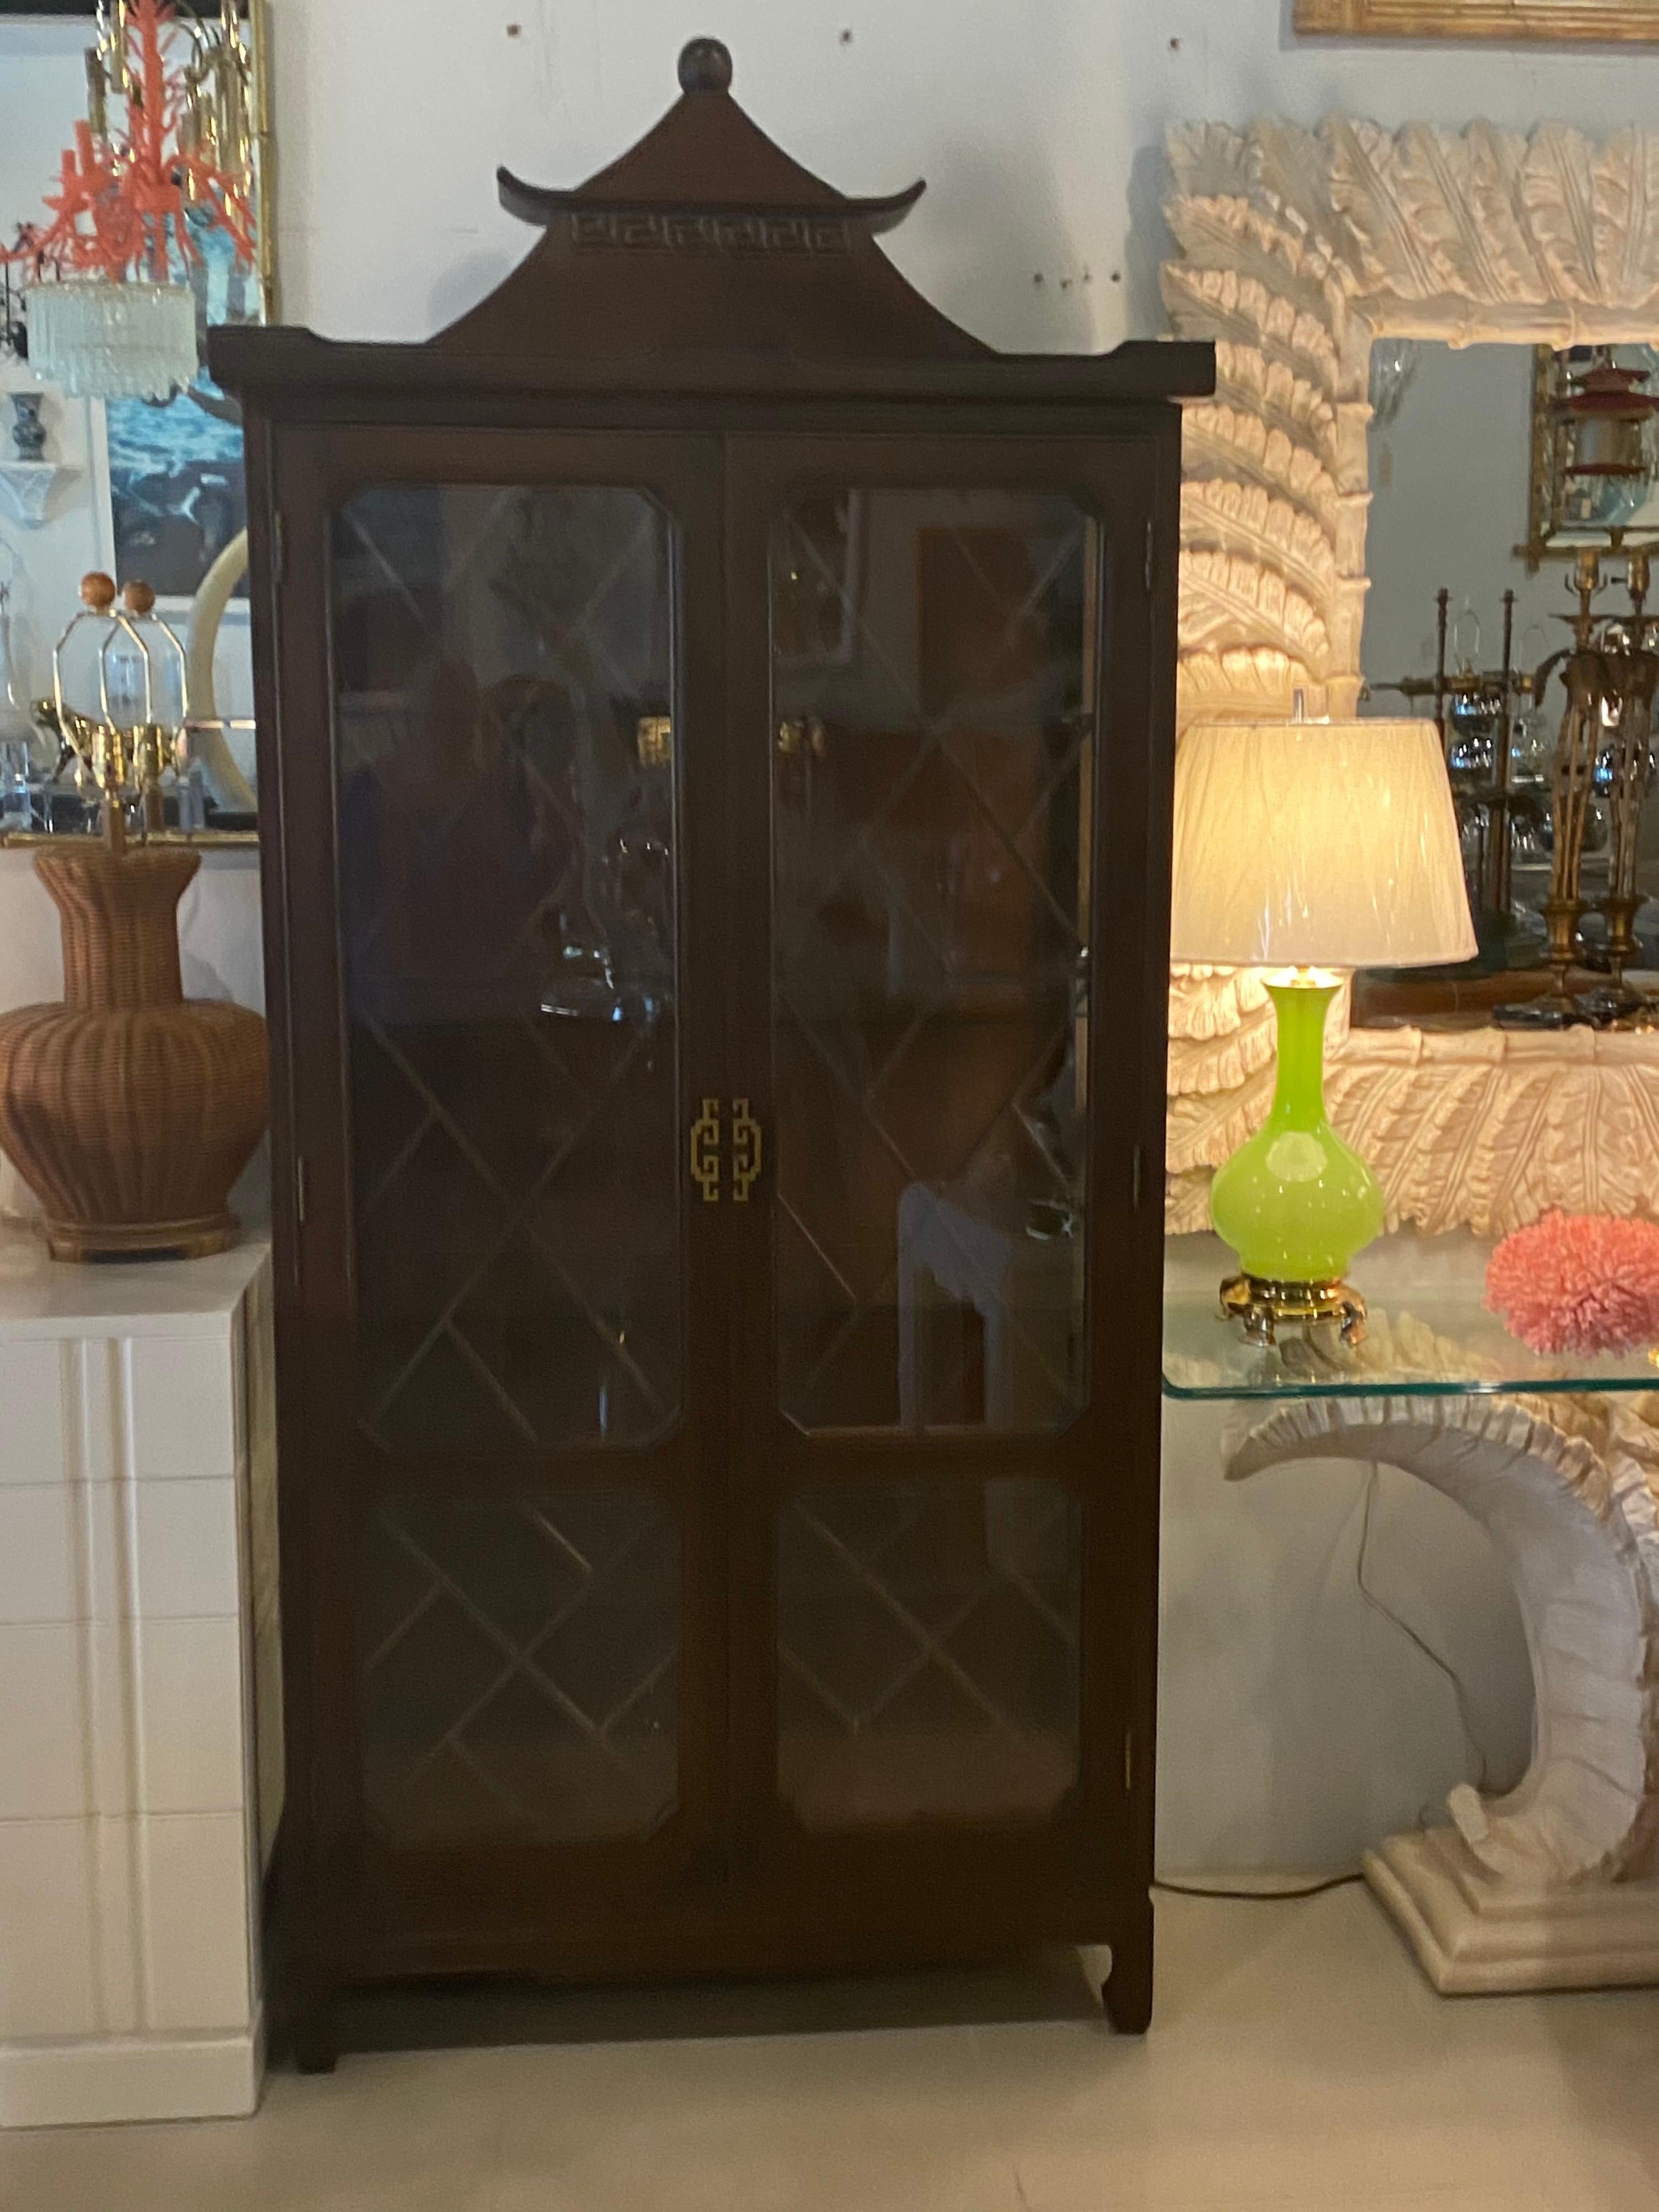 Lovely vintage pagoda top with Greek key motif. Glass doors with Chinese Chippendale wood fret design on doors. Brass detailed pulls. 4 Newly cut adjustable glass shelves. Lights up on top. Original wood finish.